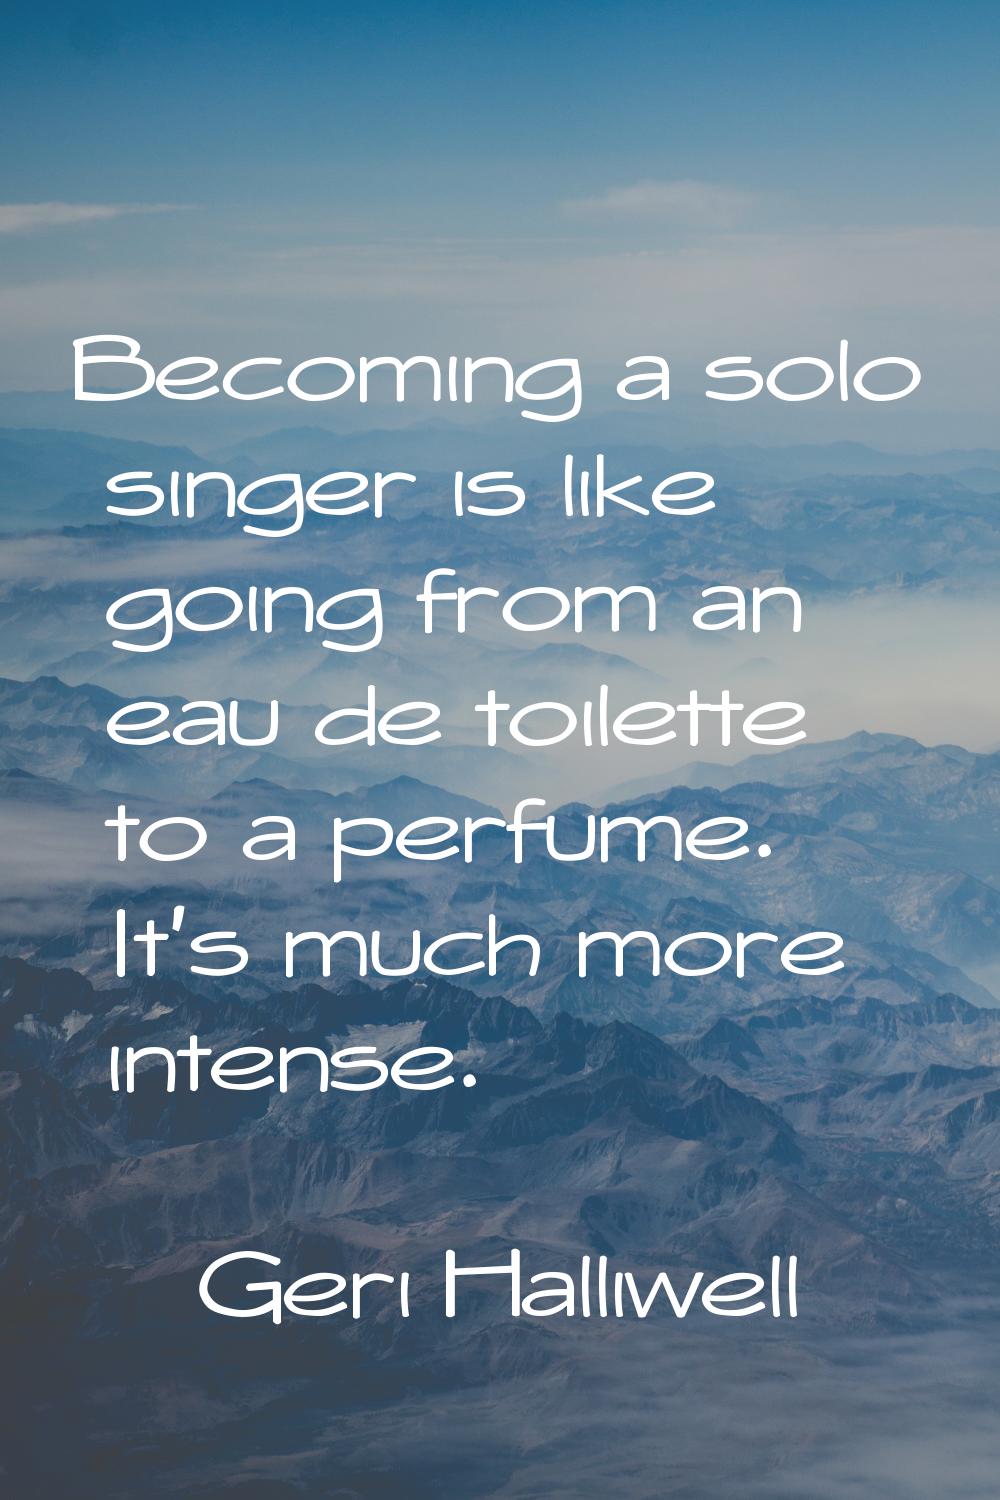 Becoming a solo singer is like going from an eau de toilette to a perfume. It's much more intense.